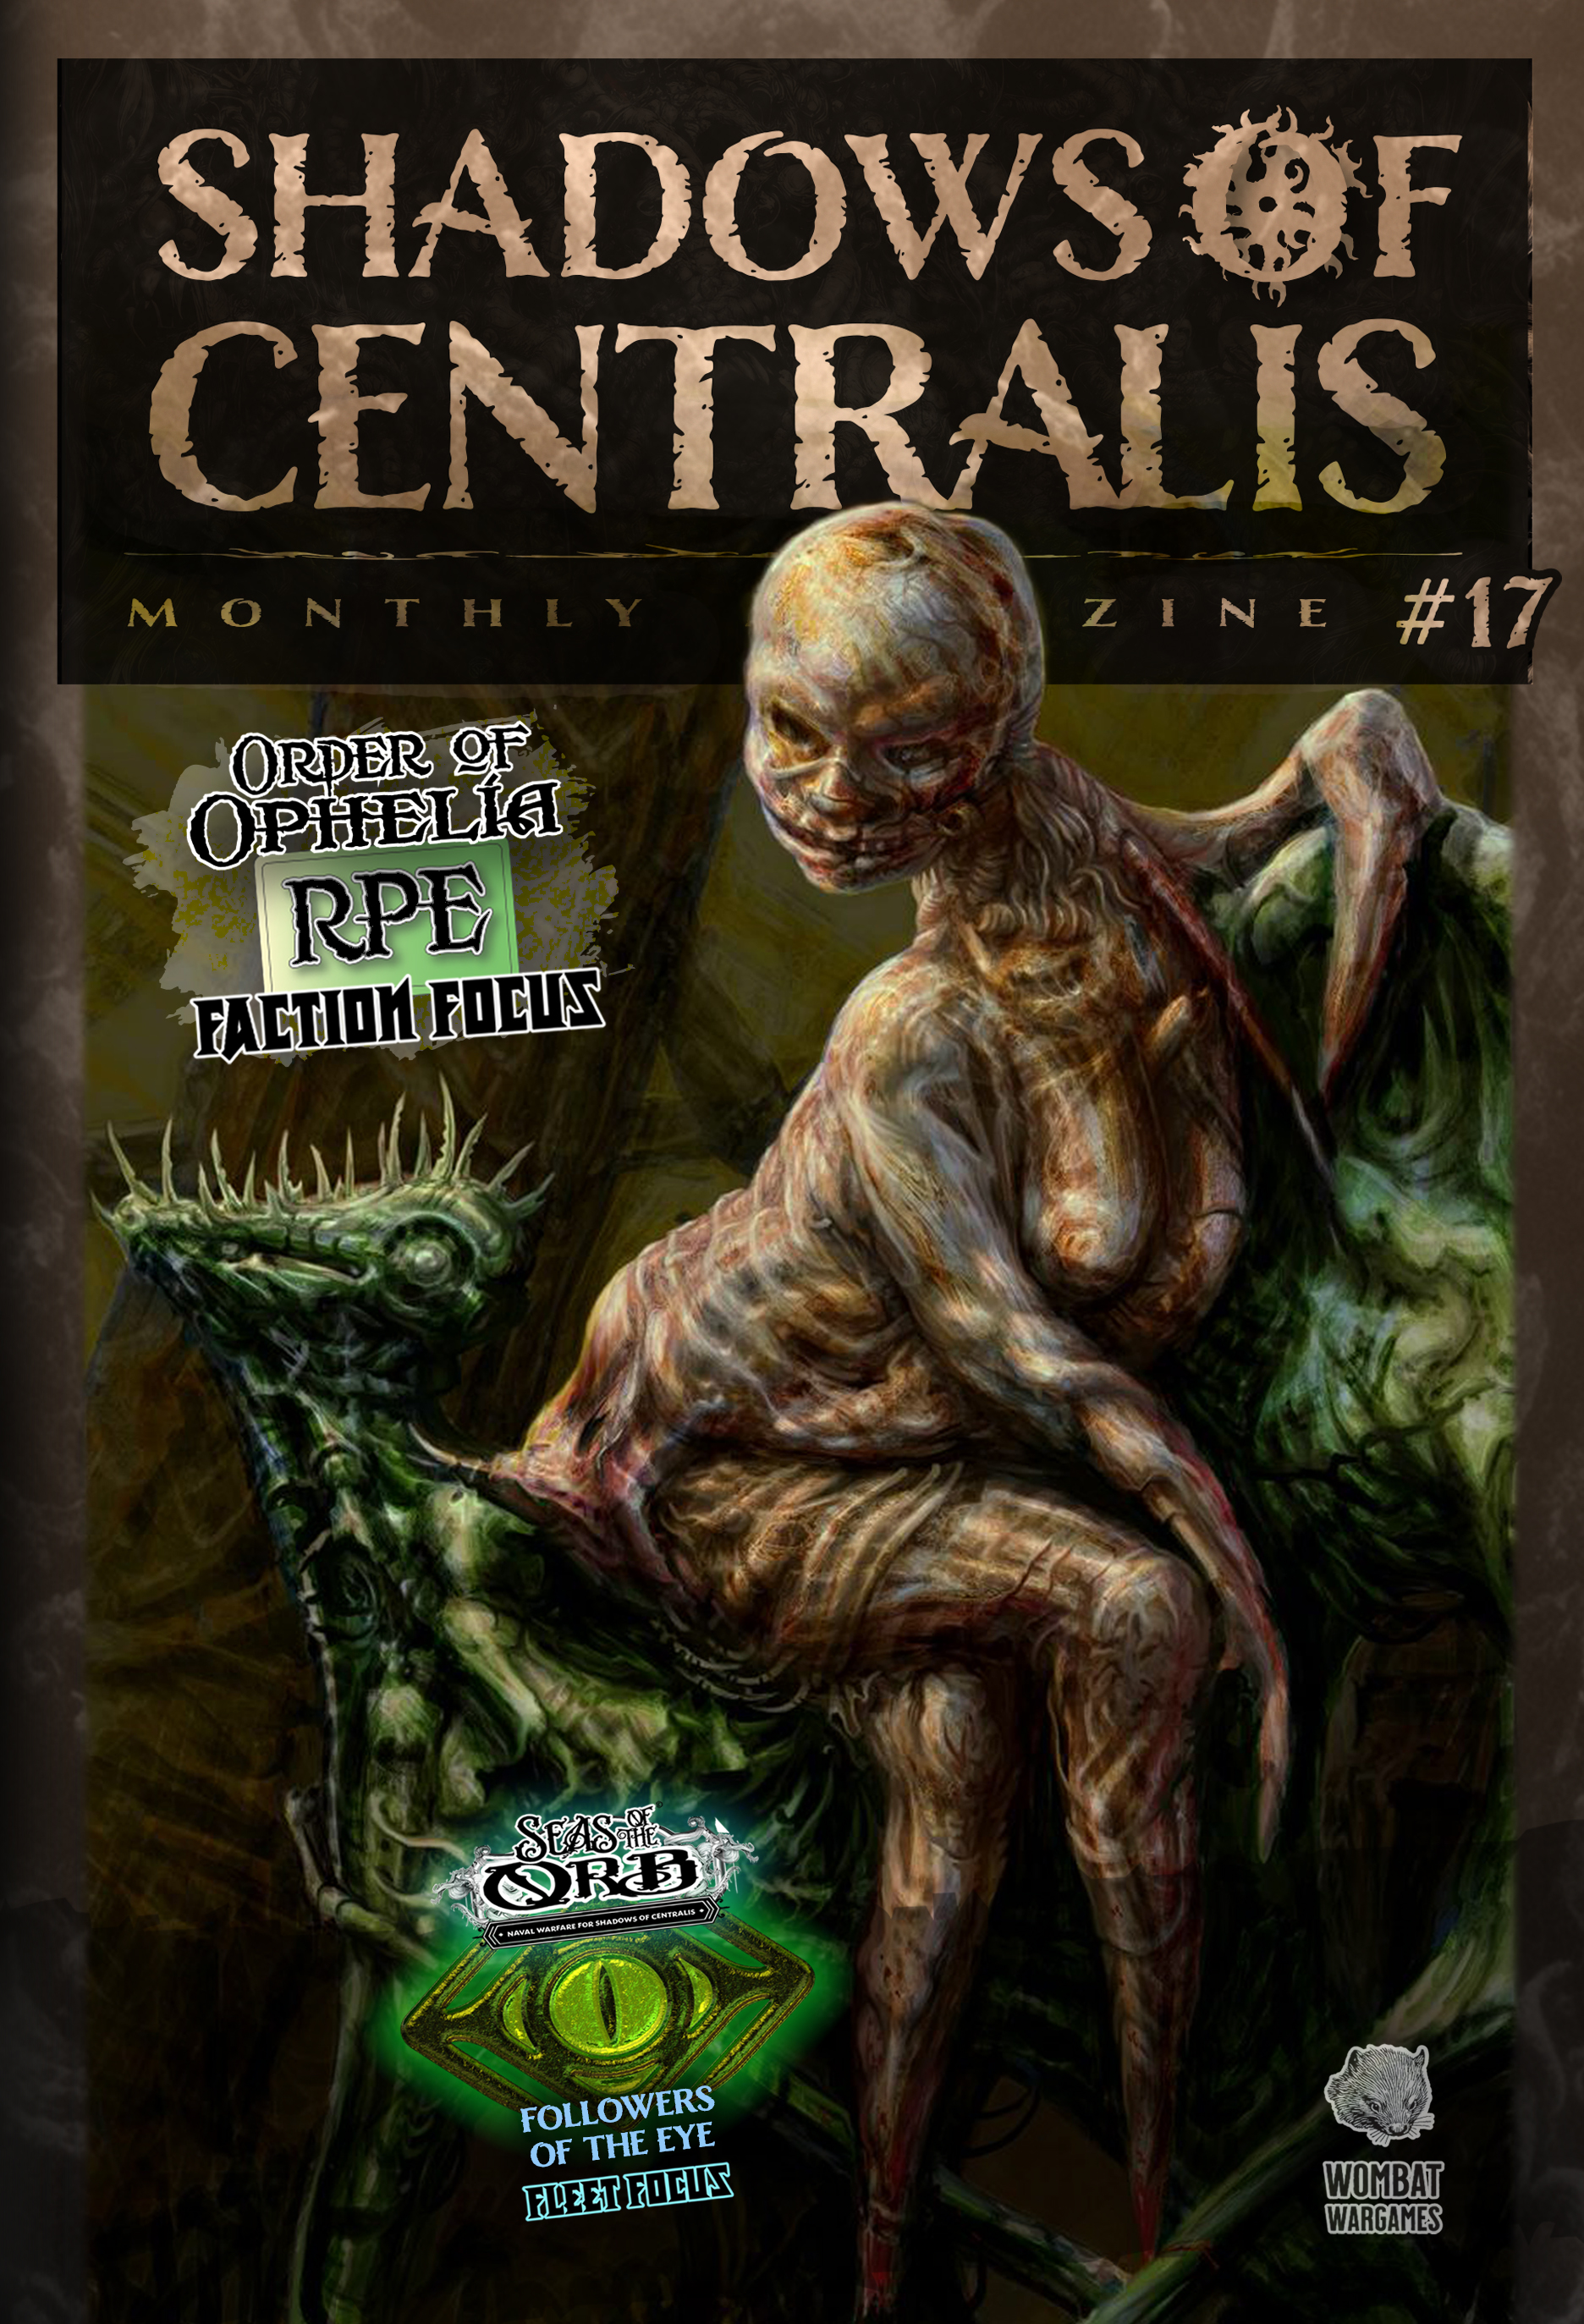 Shadows of Centralis Monthly Magazine #17 (August/ September 2023) by Wombat Wargames